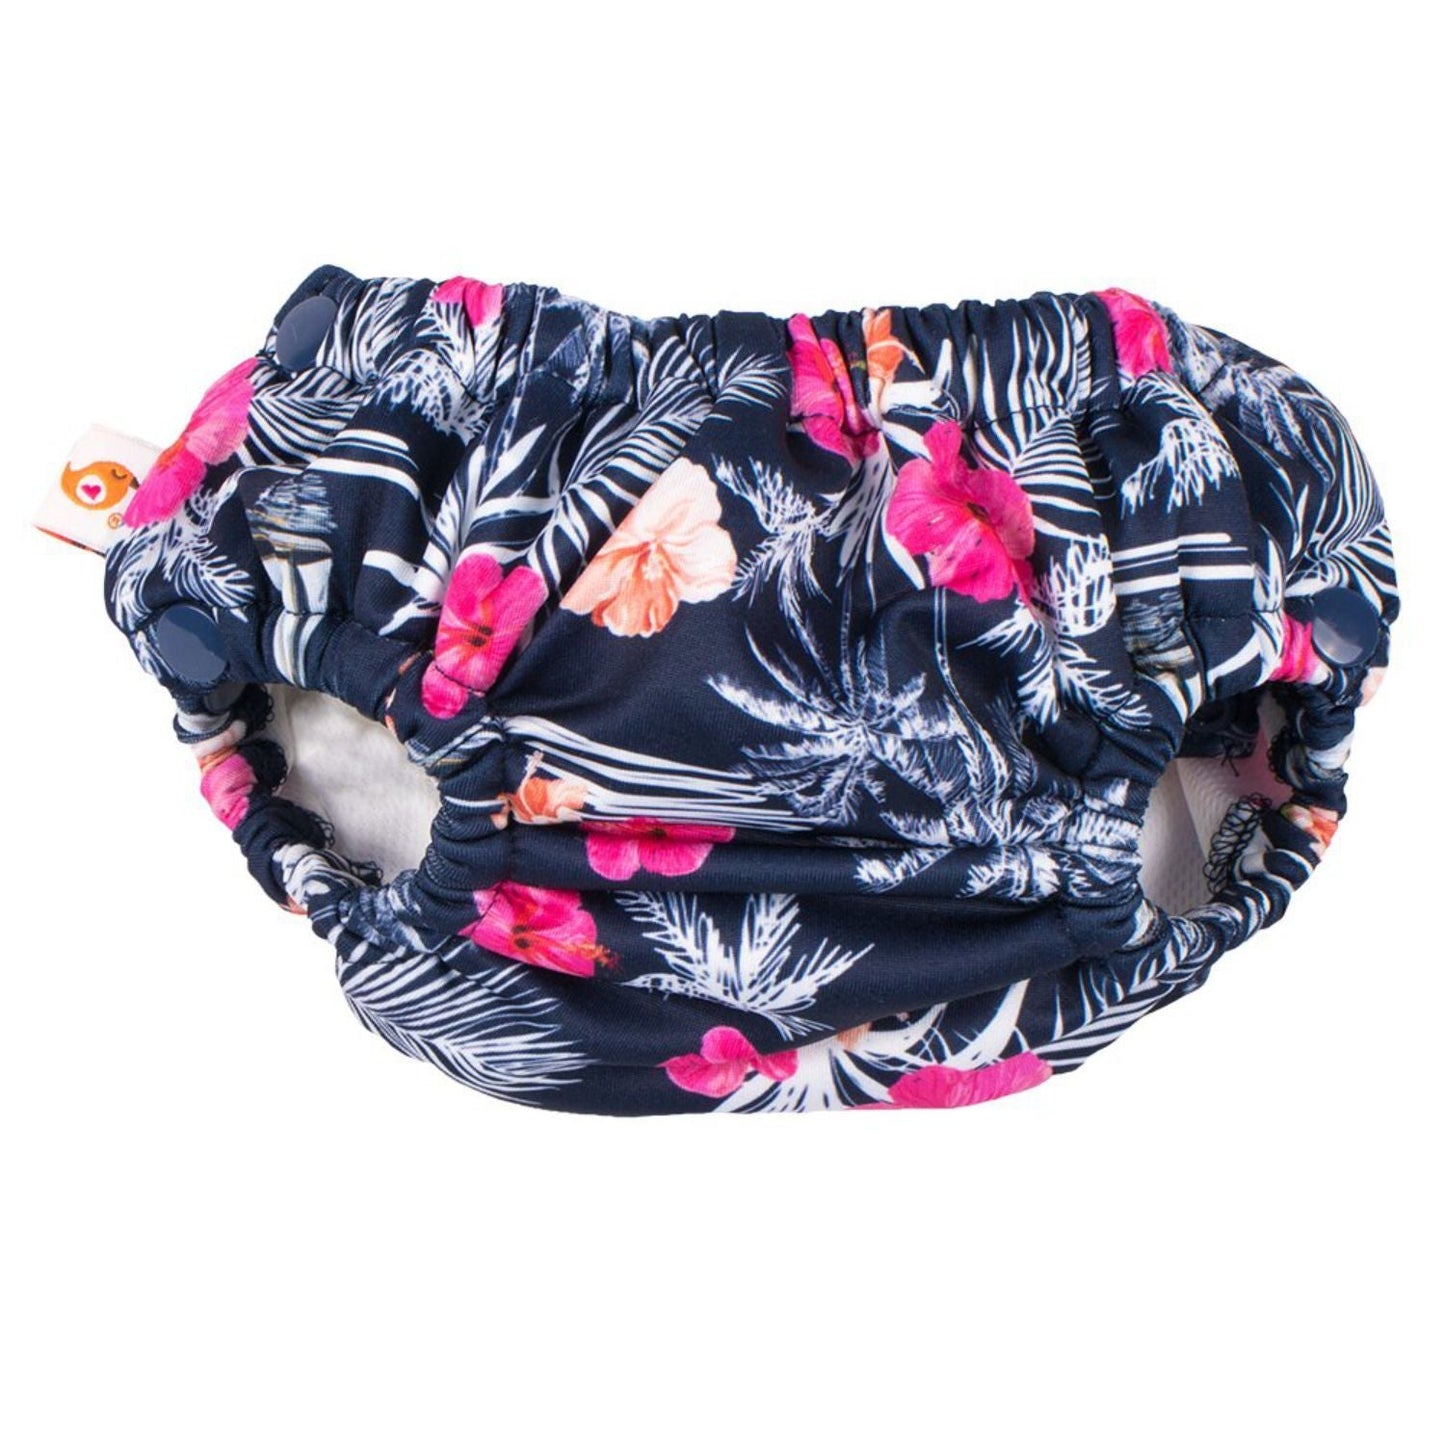 Smart Bottoms Lil Swimmers Swim Nappy - Large 30-50lbs-Swim Nappy-Smart Bottoms-Paradise-The Nappy Market